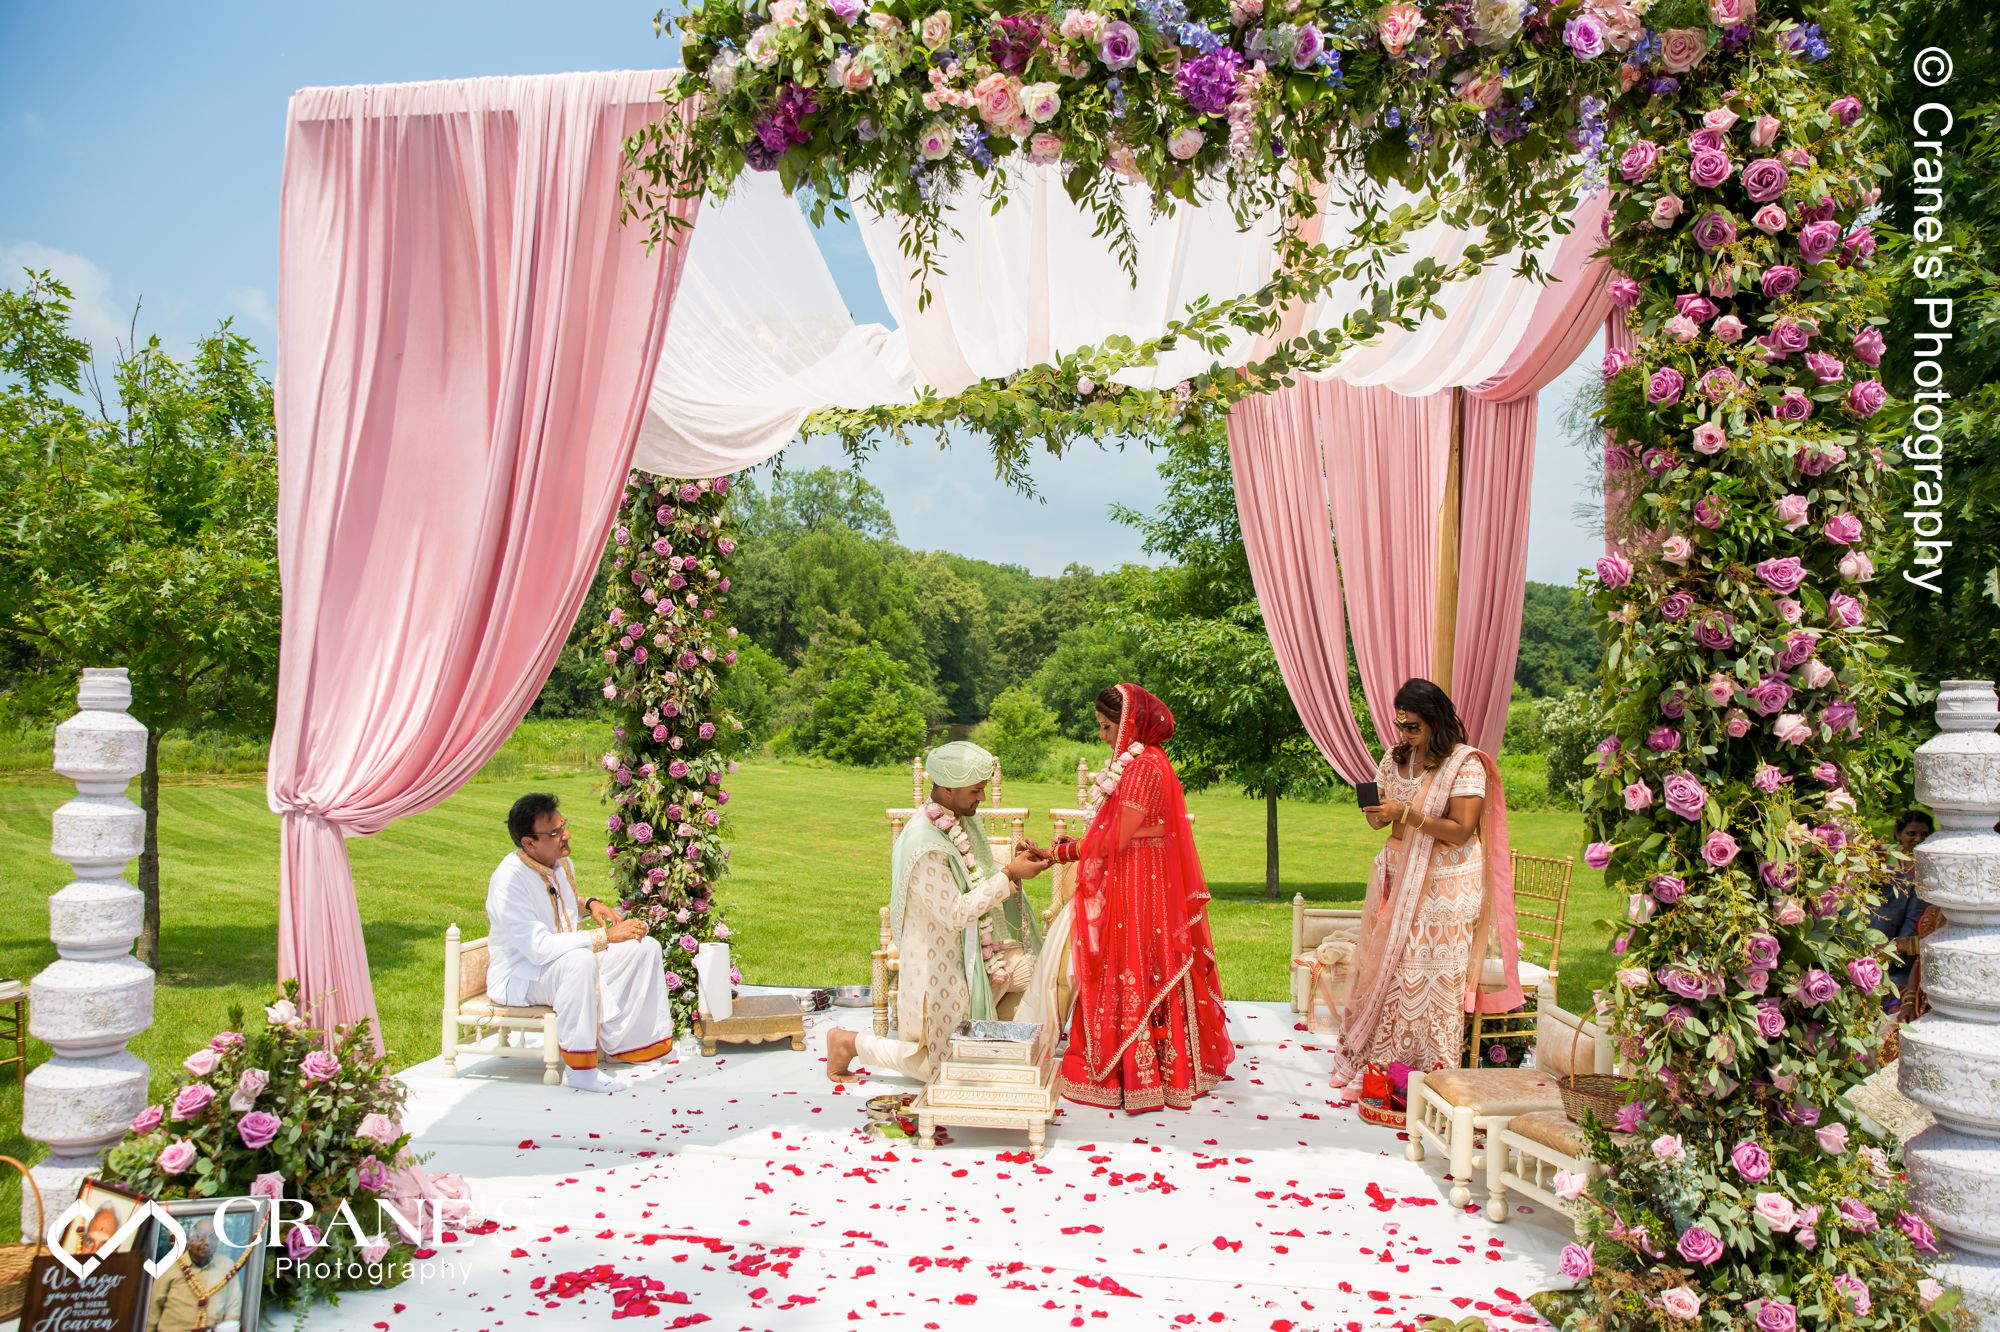 An Indian bride and groom exchange wedding ring under a mandap at an outdoor wedding ceremony site in Chicago